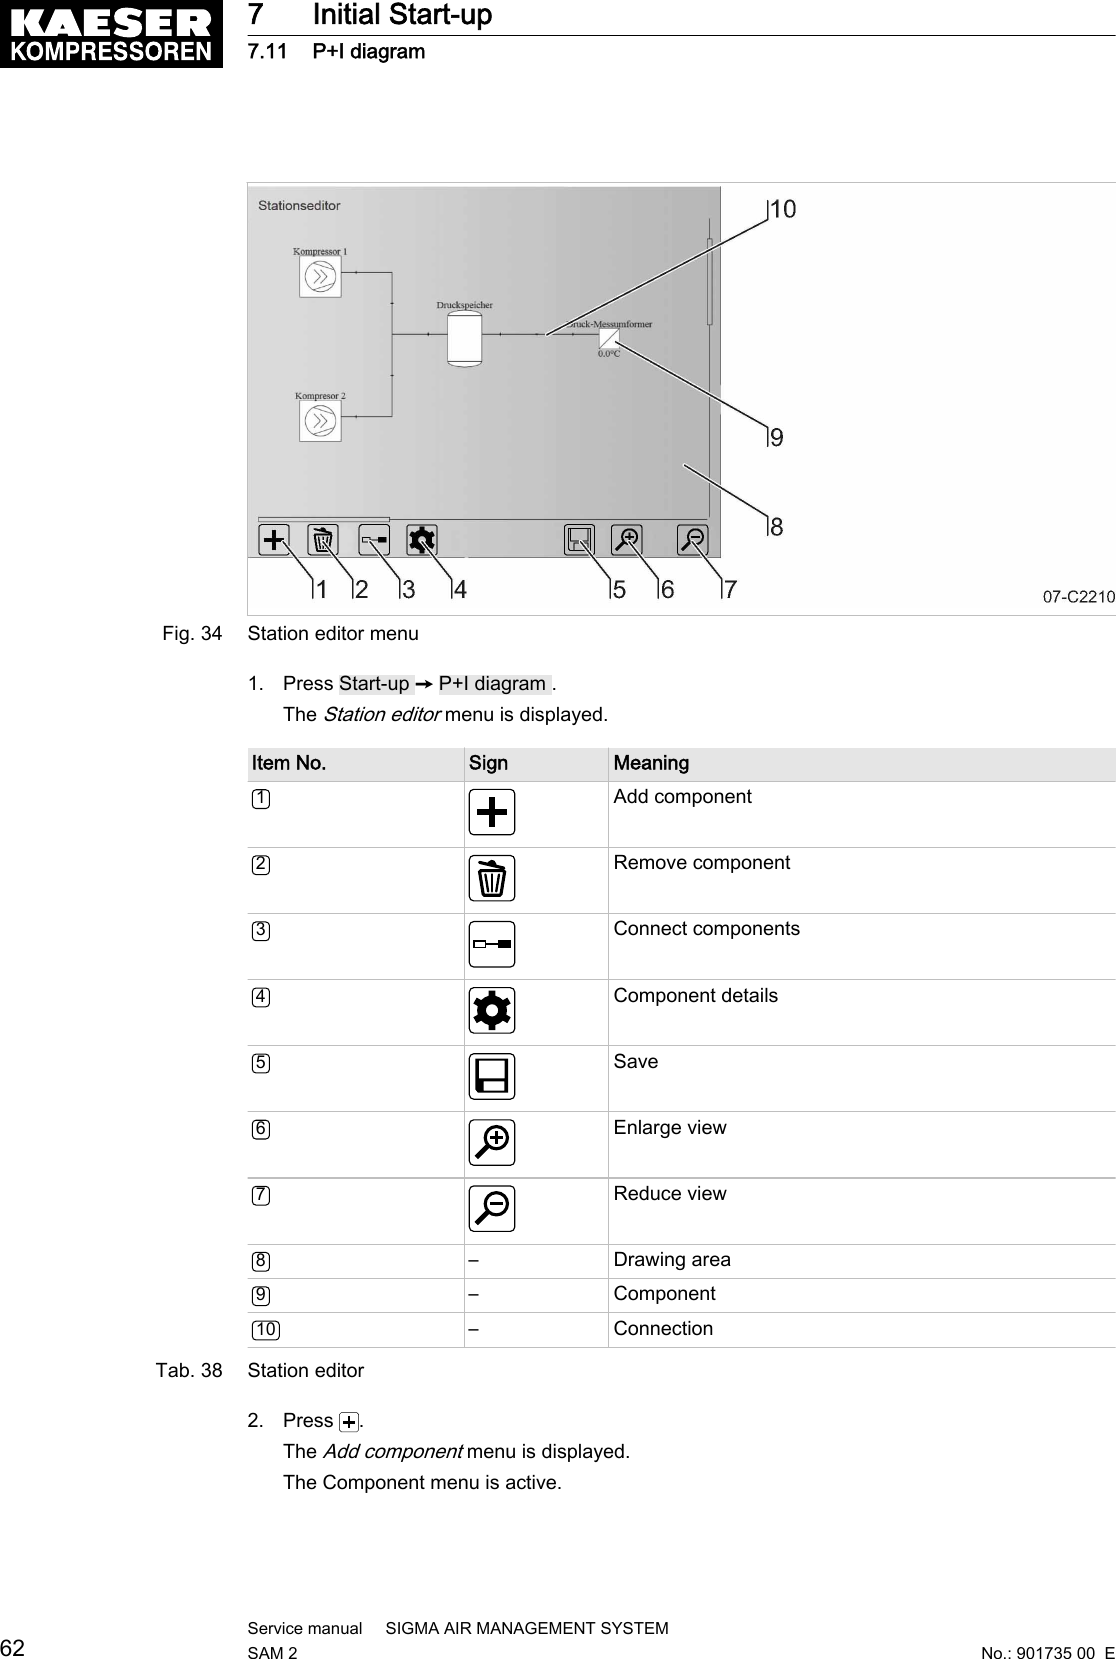 Fig. 34 Station editor menu1. Press Start-up ➙ P+I diagram .The Station editor menu is displayed.Item No. Sign Meaning1Add component2Remove component3Connect components4Component details5Save6Enlarge view7Reduce view8– Drawing area9– Component10 – ConnectionTab. 38 Station editor2. Press  .The Add component menu is displayed.The Component menu is active.7 Initial Start-up7.11 P+I diagram62Service manual     SIGMA AIR MANAGEMENT SYSTEMSAM 2  No.: 901735 00  E